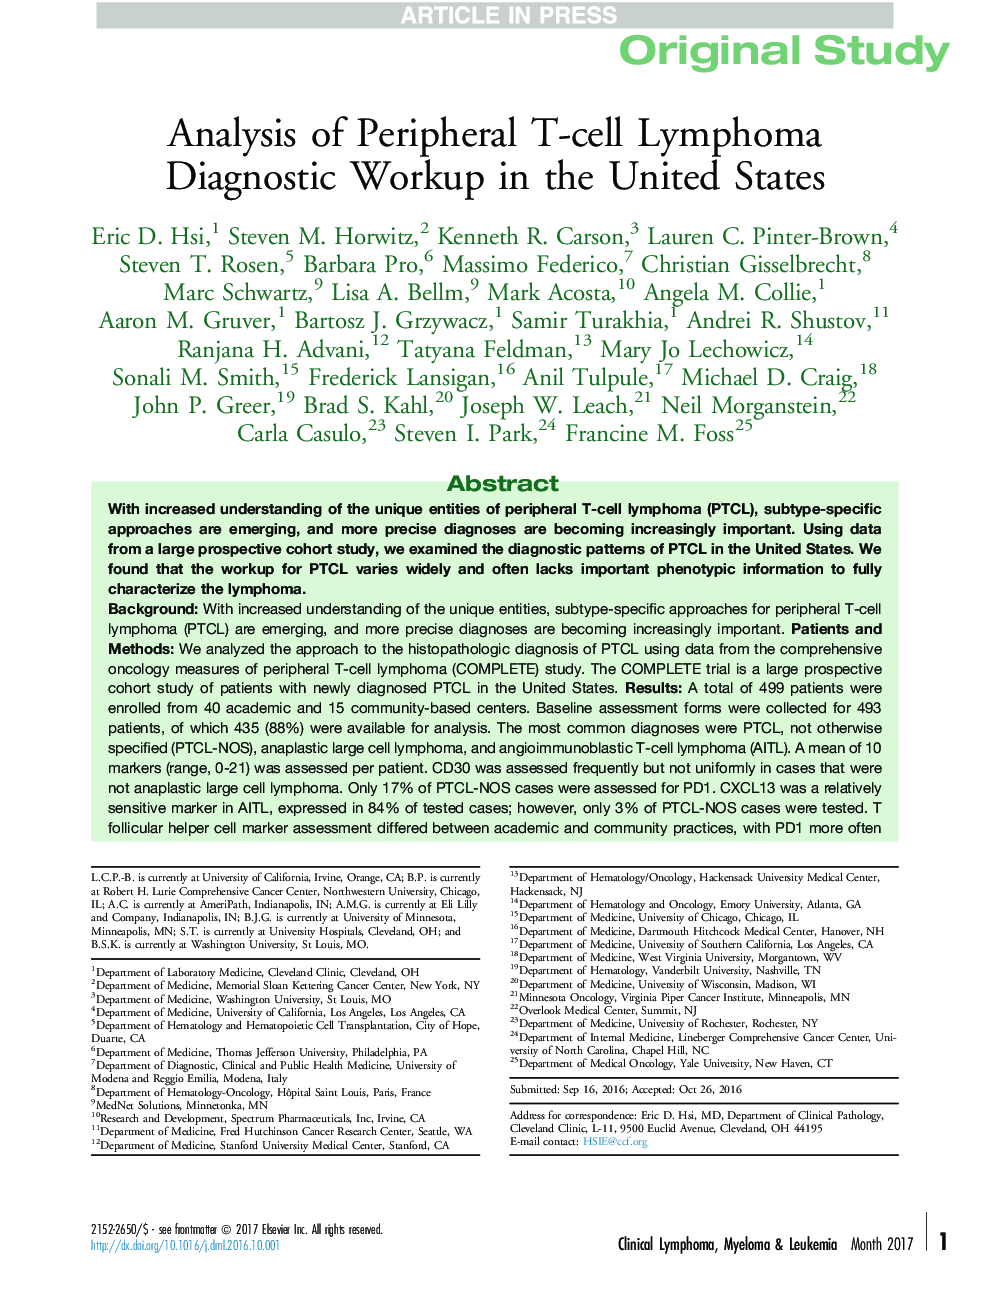 Analysis of Peripheral T-cell Lymphoma Diagnostic Workup in the United States